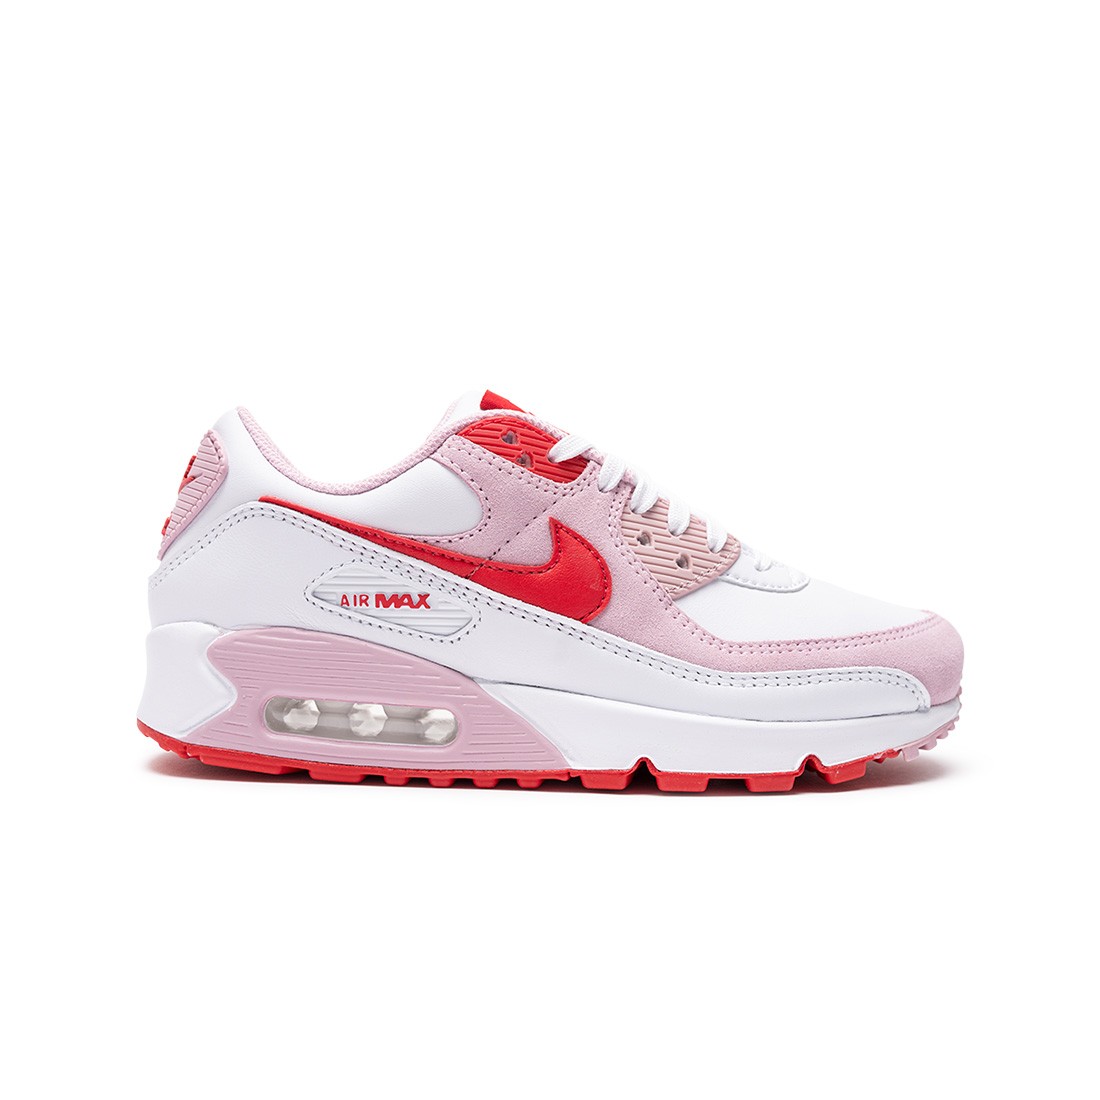 womens nike air max 90 red and white